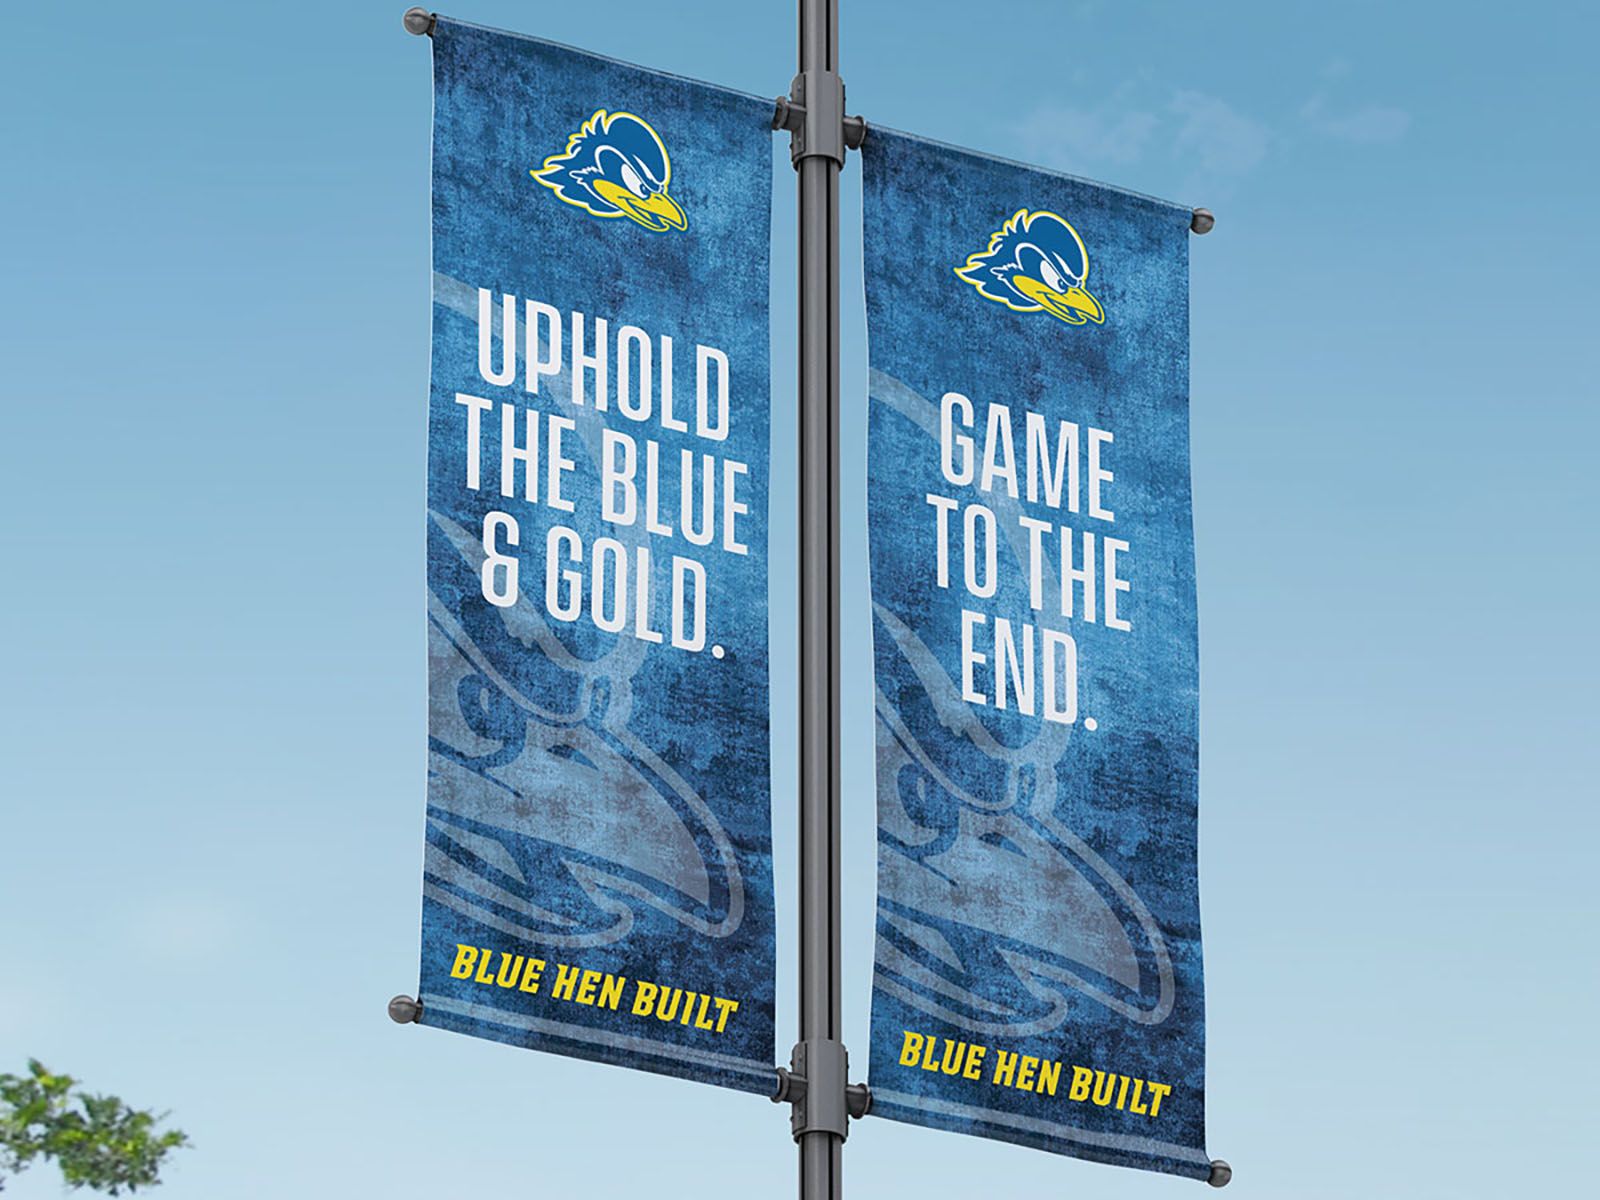 University of Delaware Blue Hens - Marketing and Ad Campaign